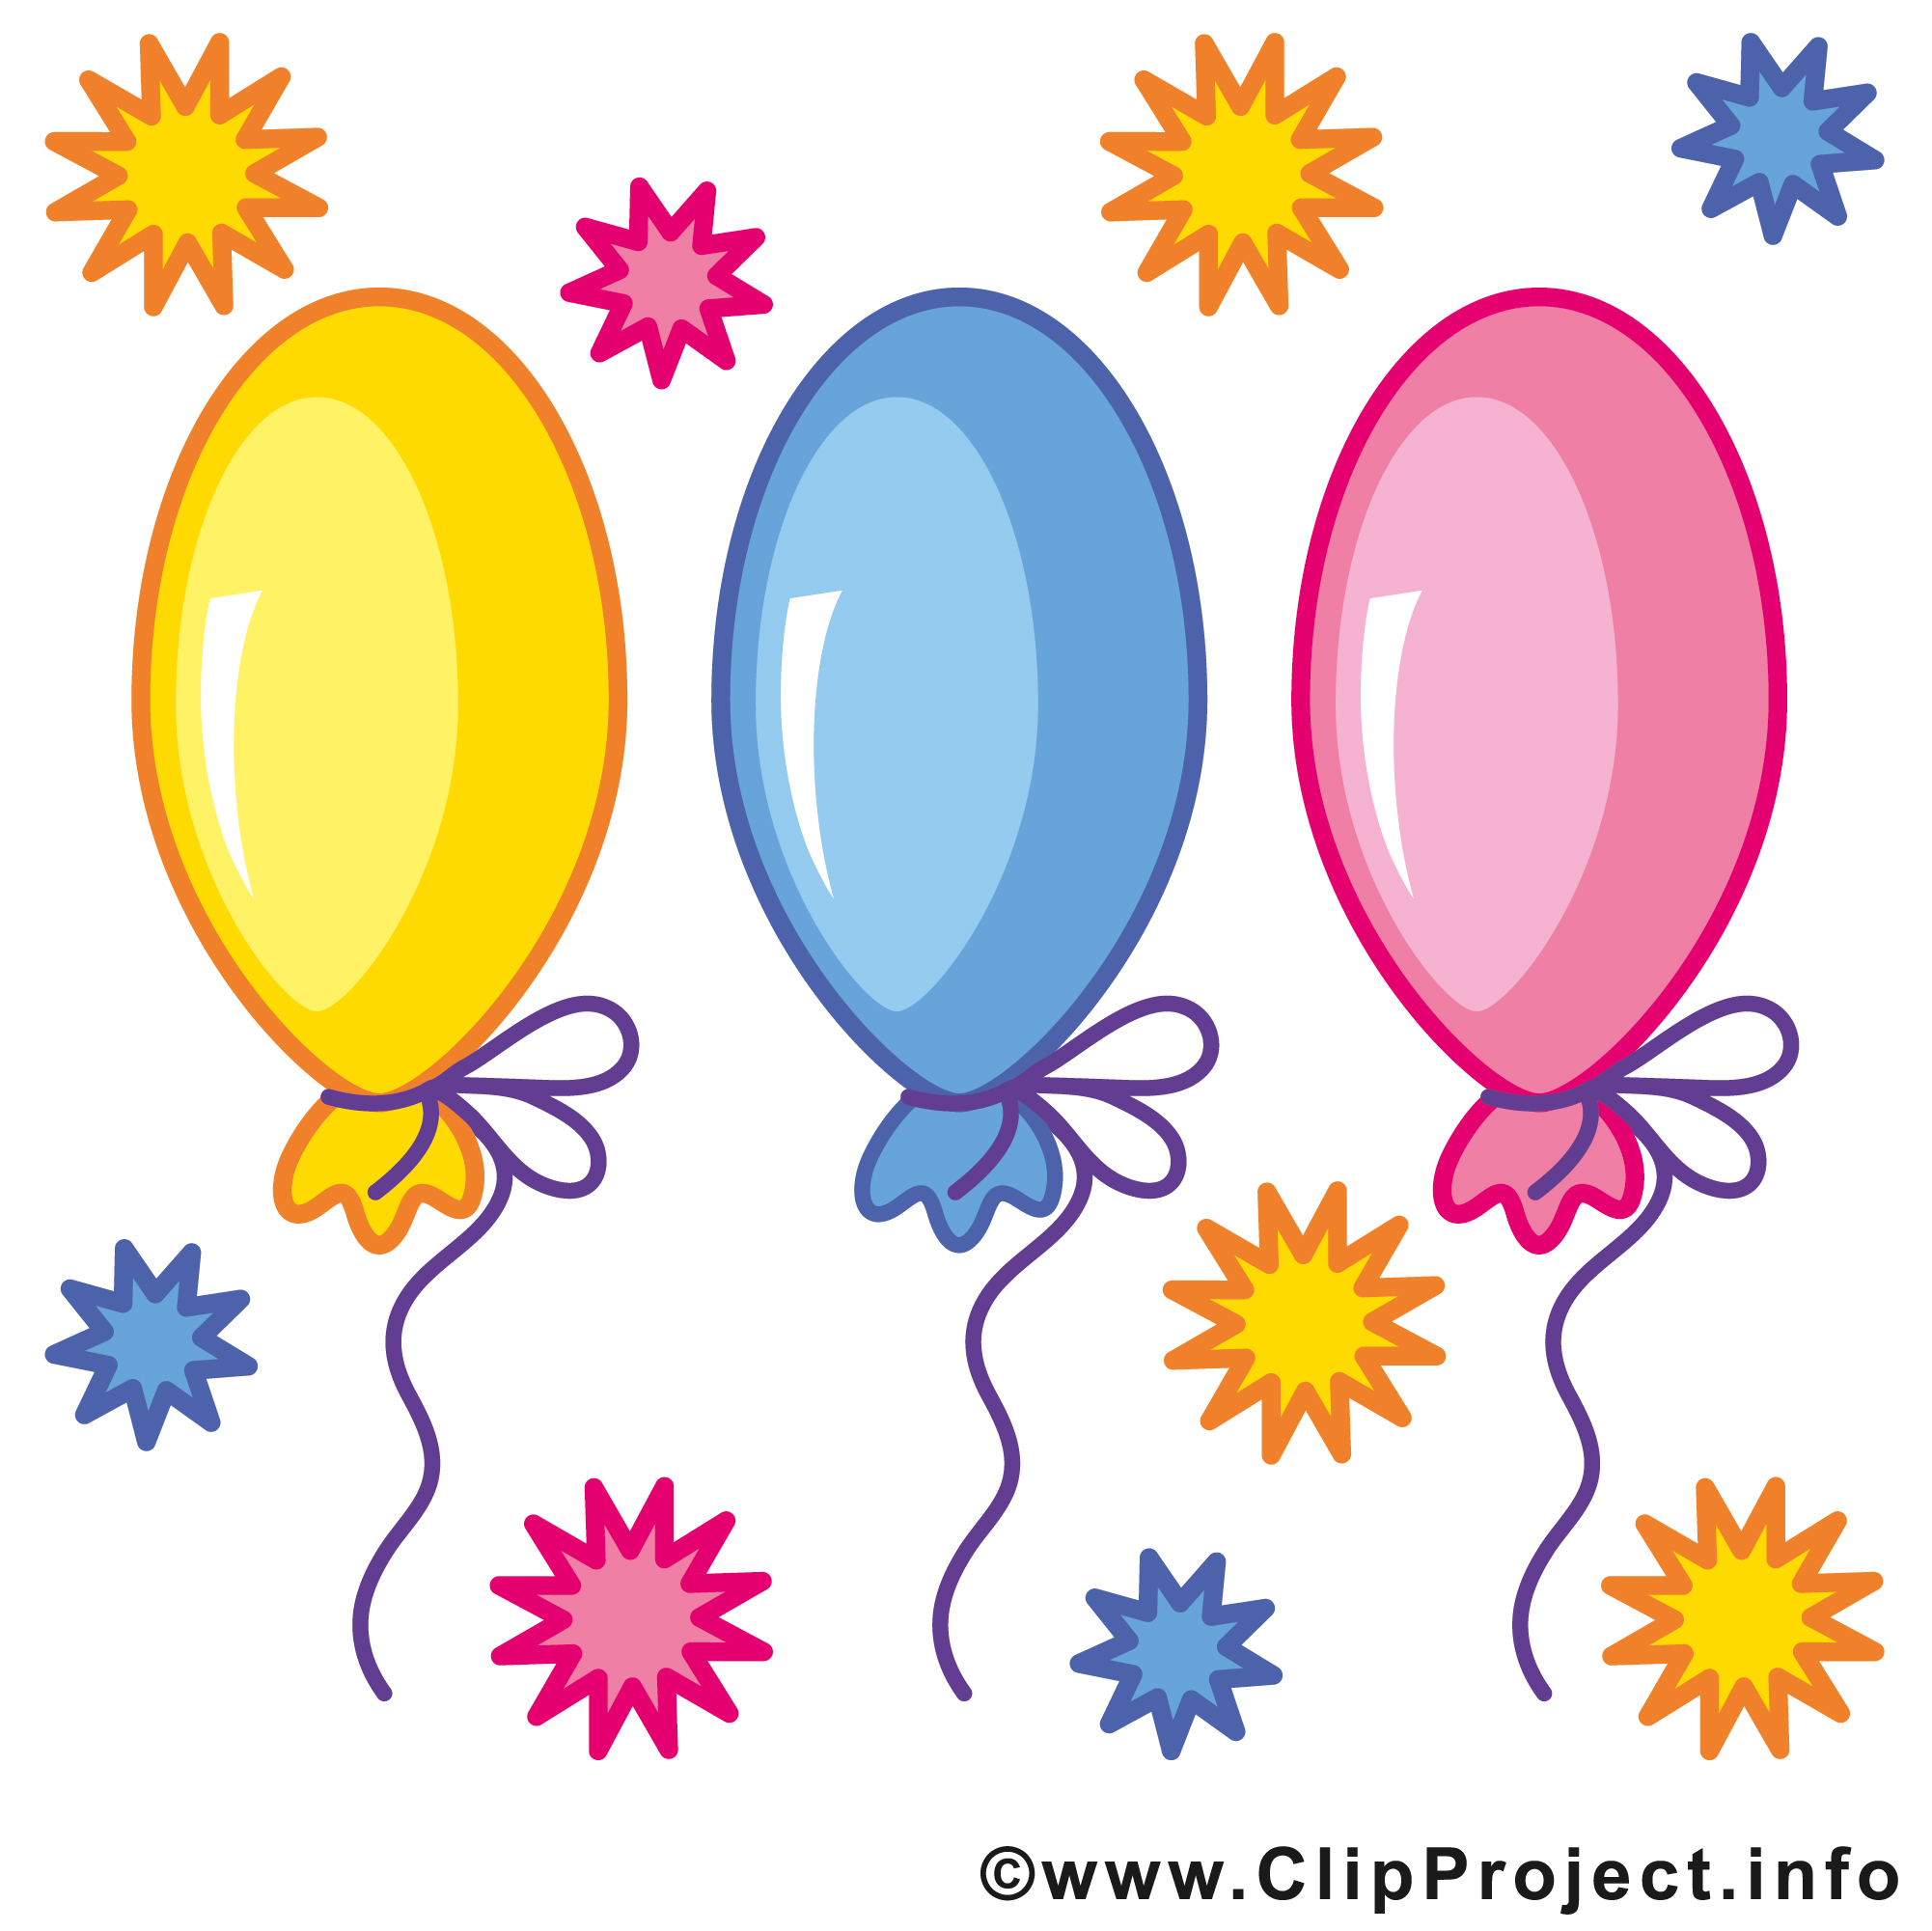 free clip art - Clipart Images Free